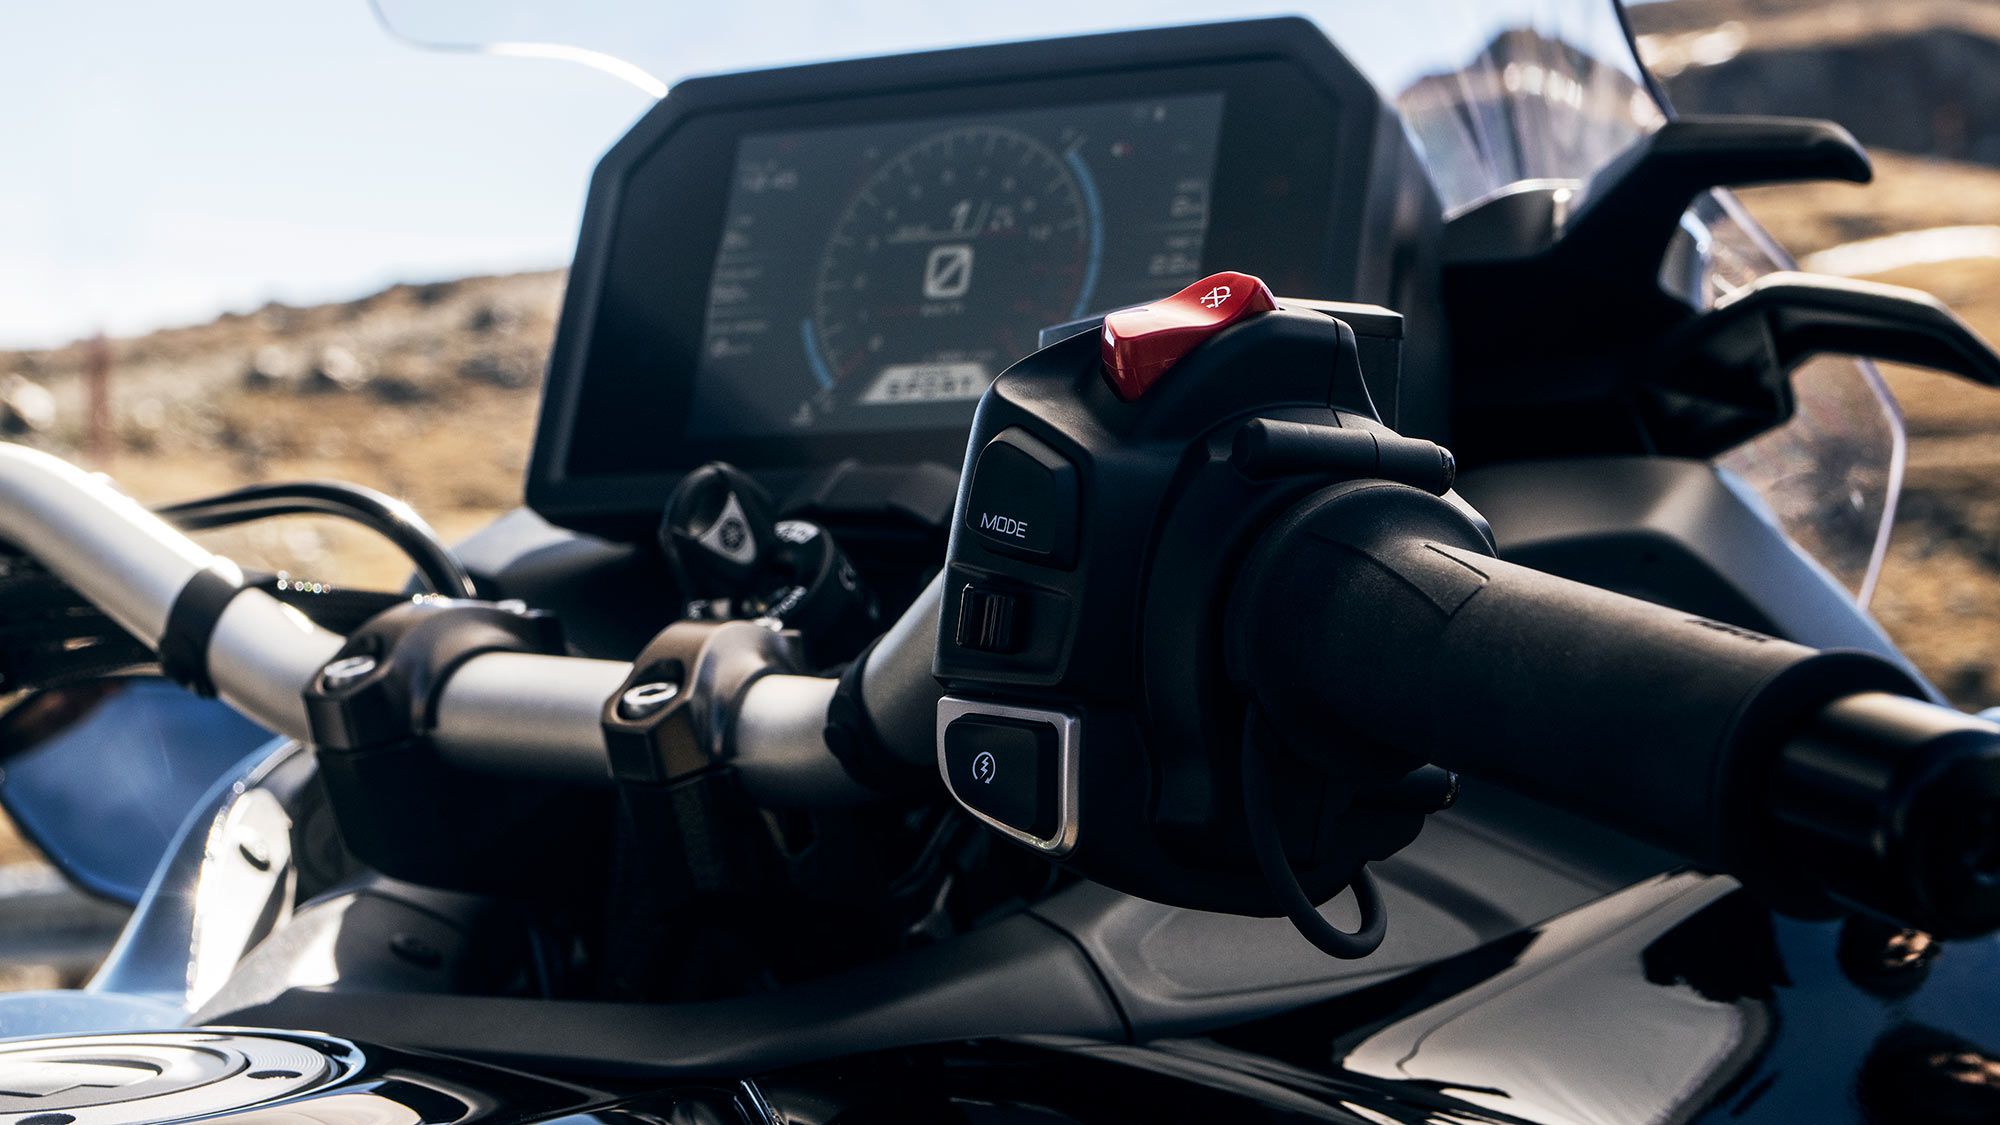 Riding through cold weather is bound to happen on a long tour; new heated grips are there to keep the rider’s hands warm.